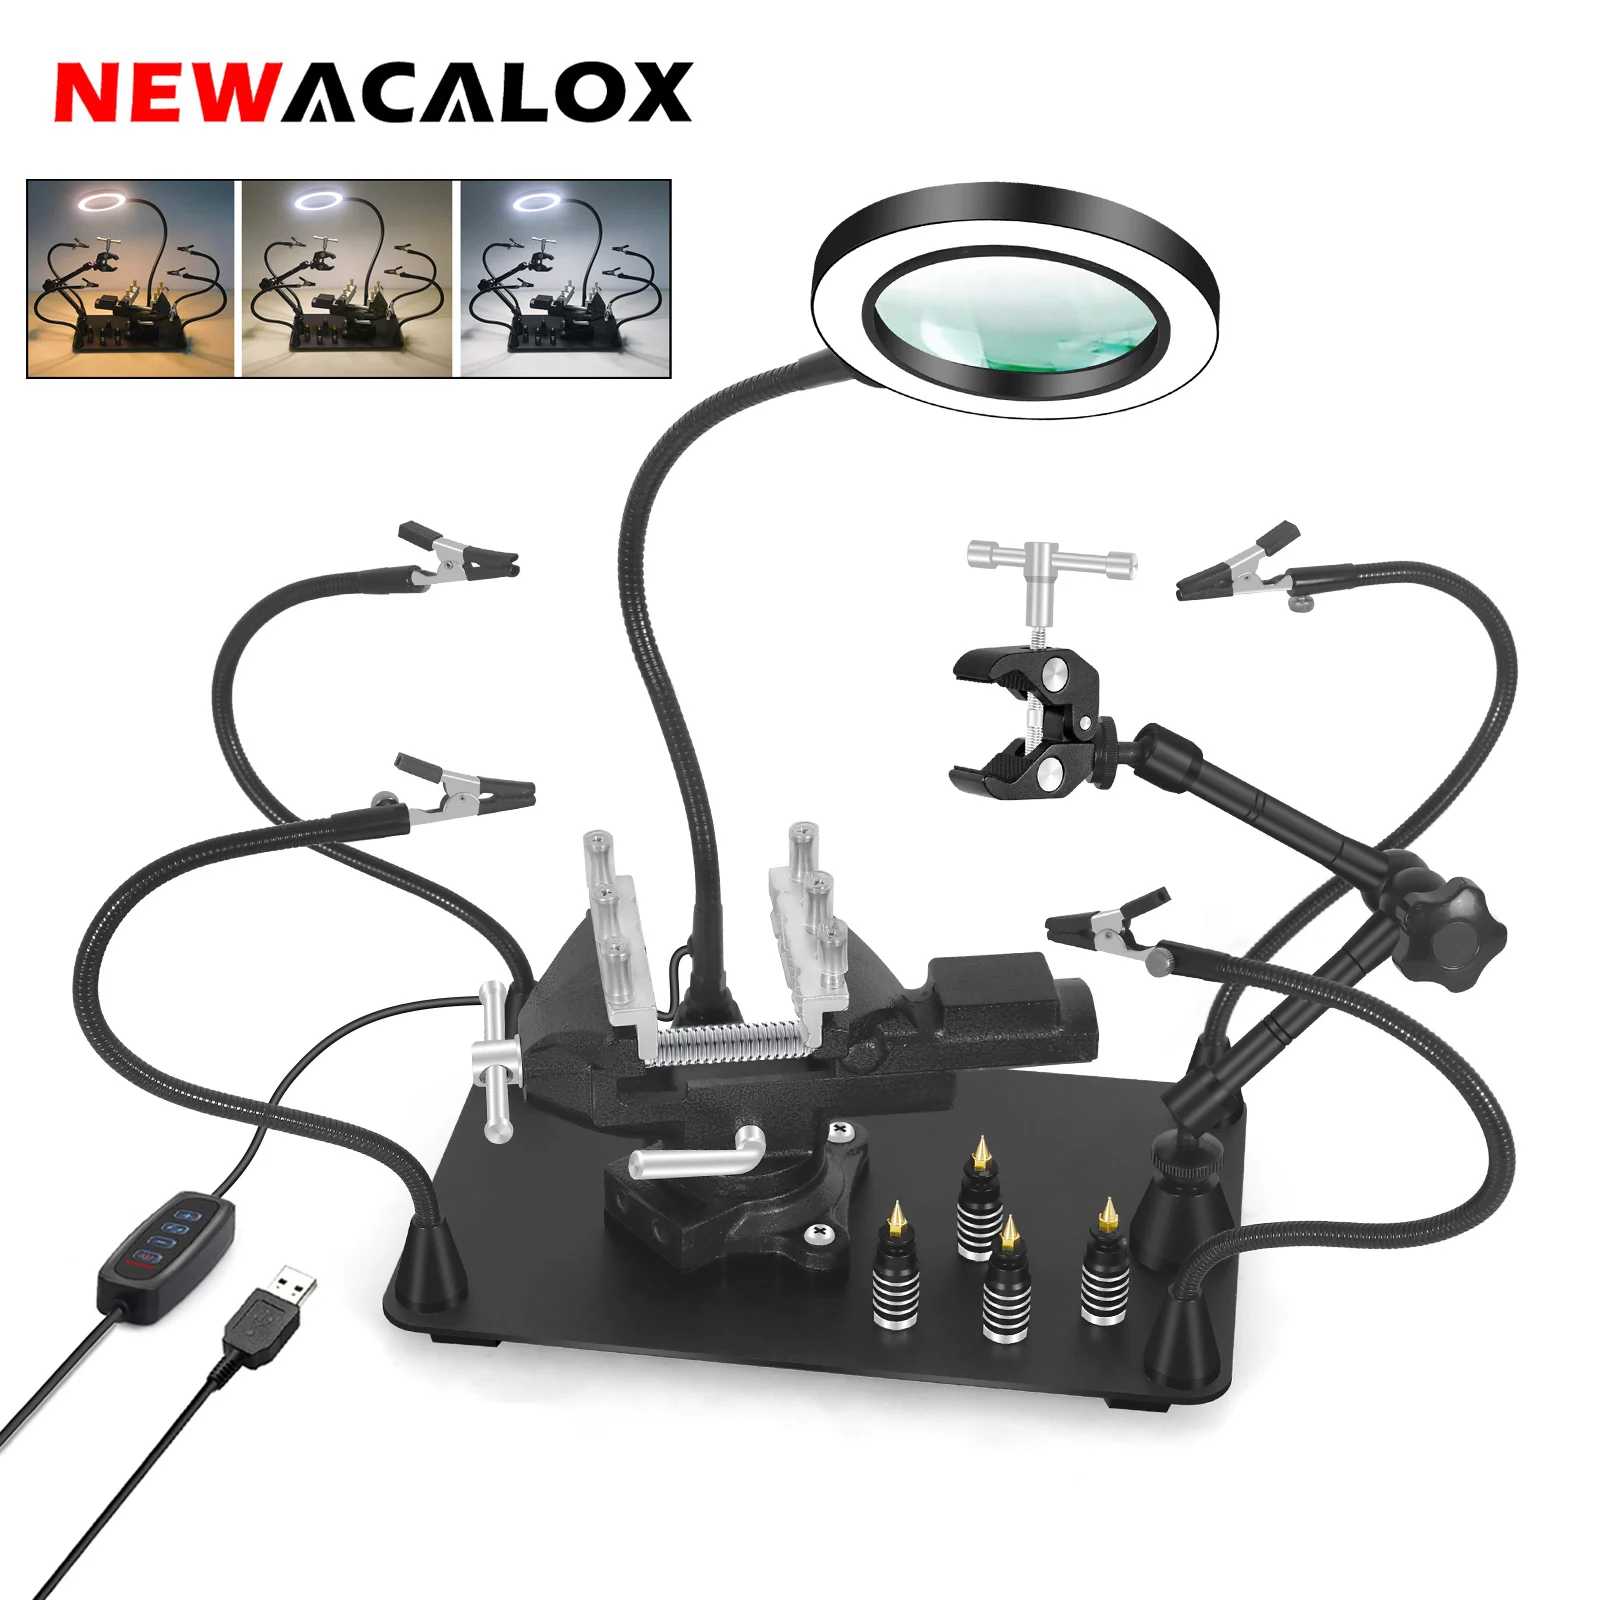 NEWACALOX Magnetic Helping Hands Soldering Third Hand PCB Circuit Board Holder with 5X LED Magnifying Lamp 360 Heat Gun Holder newacalox circuit board holder adjustable 360°degree flipping with 3x magnifying glass lamp for clamping pcb soldering repair